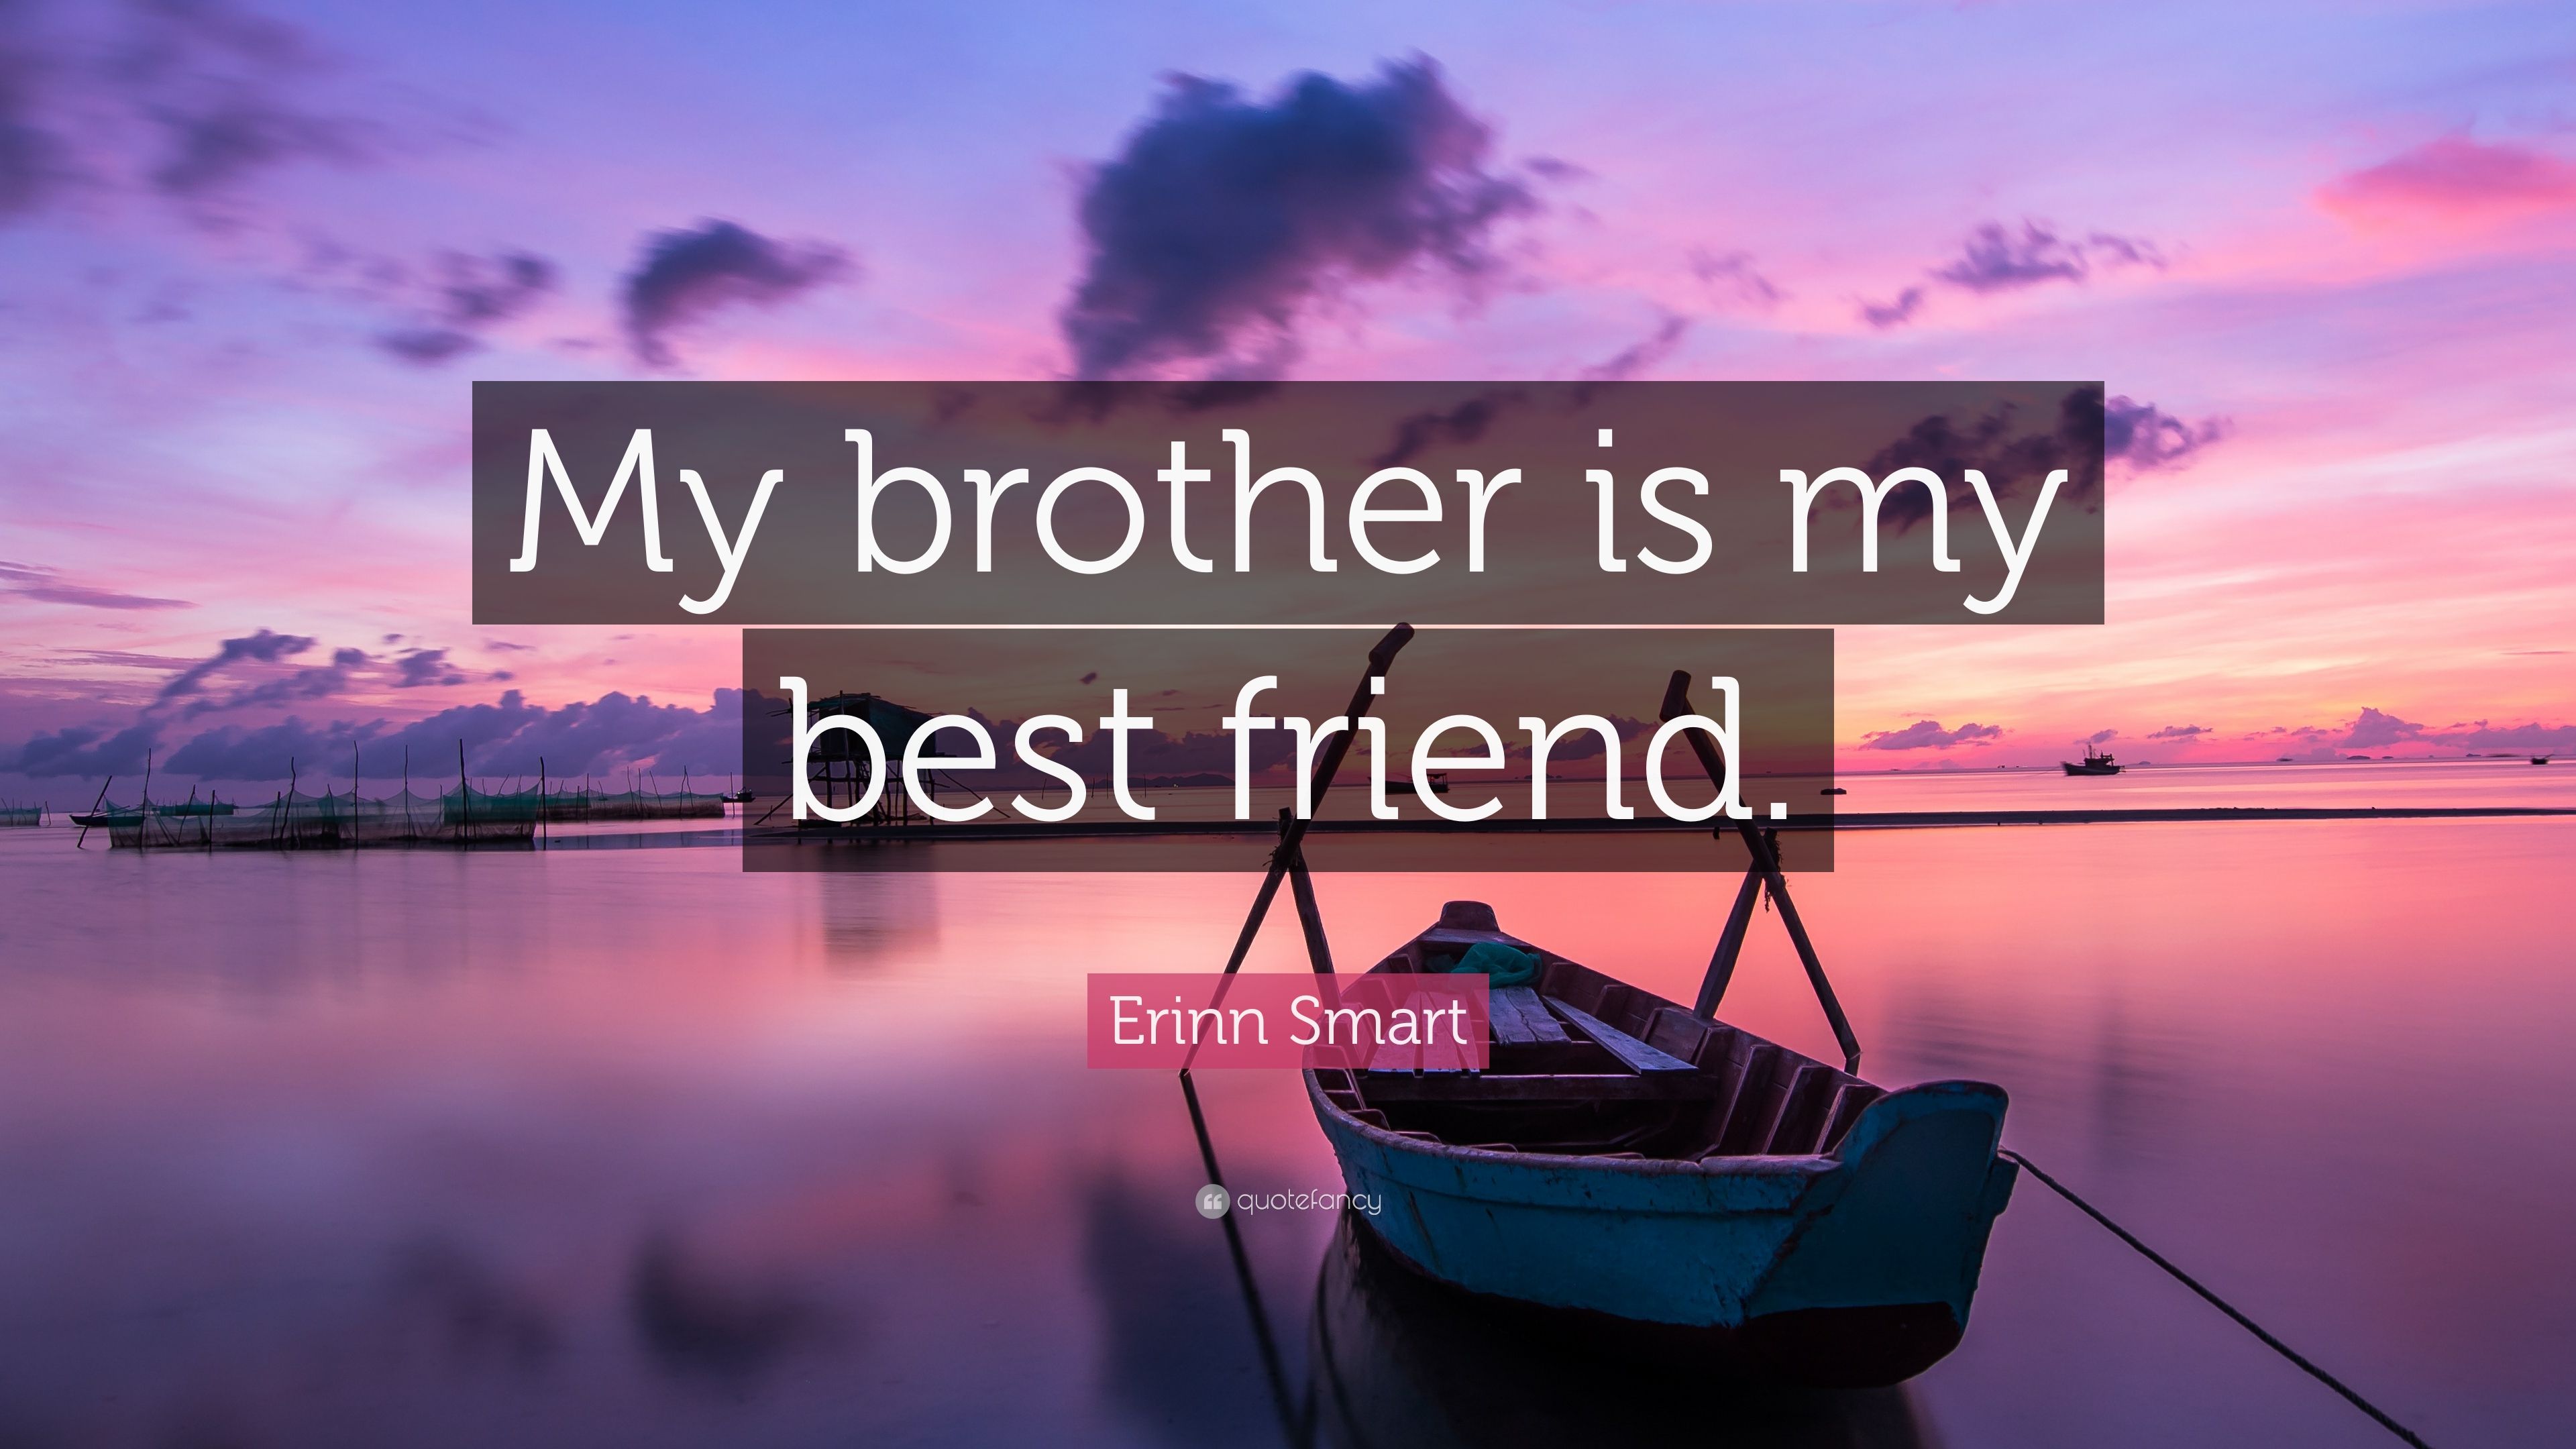 Erinn Smart Quote: "My brother is my best friend. 